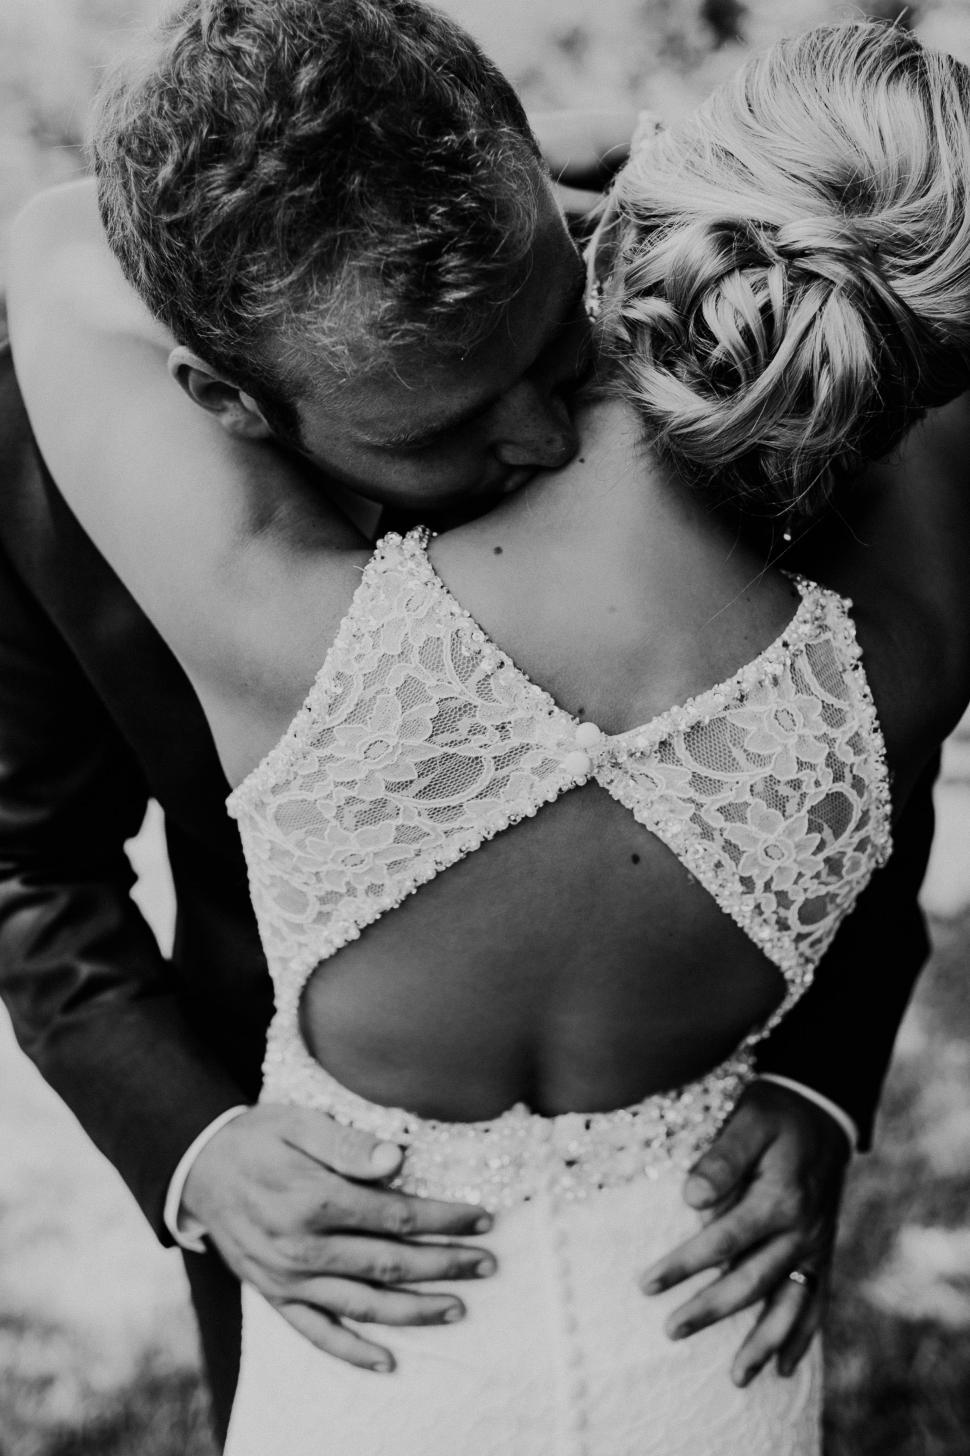 Free Image of Bride and Groom Embracing in Black and White 